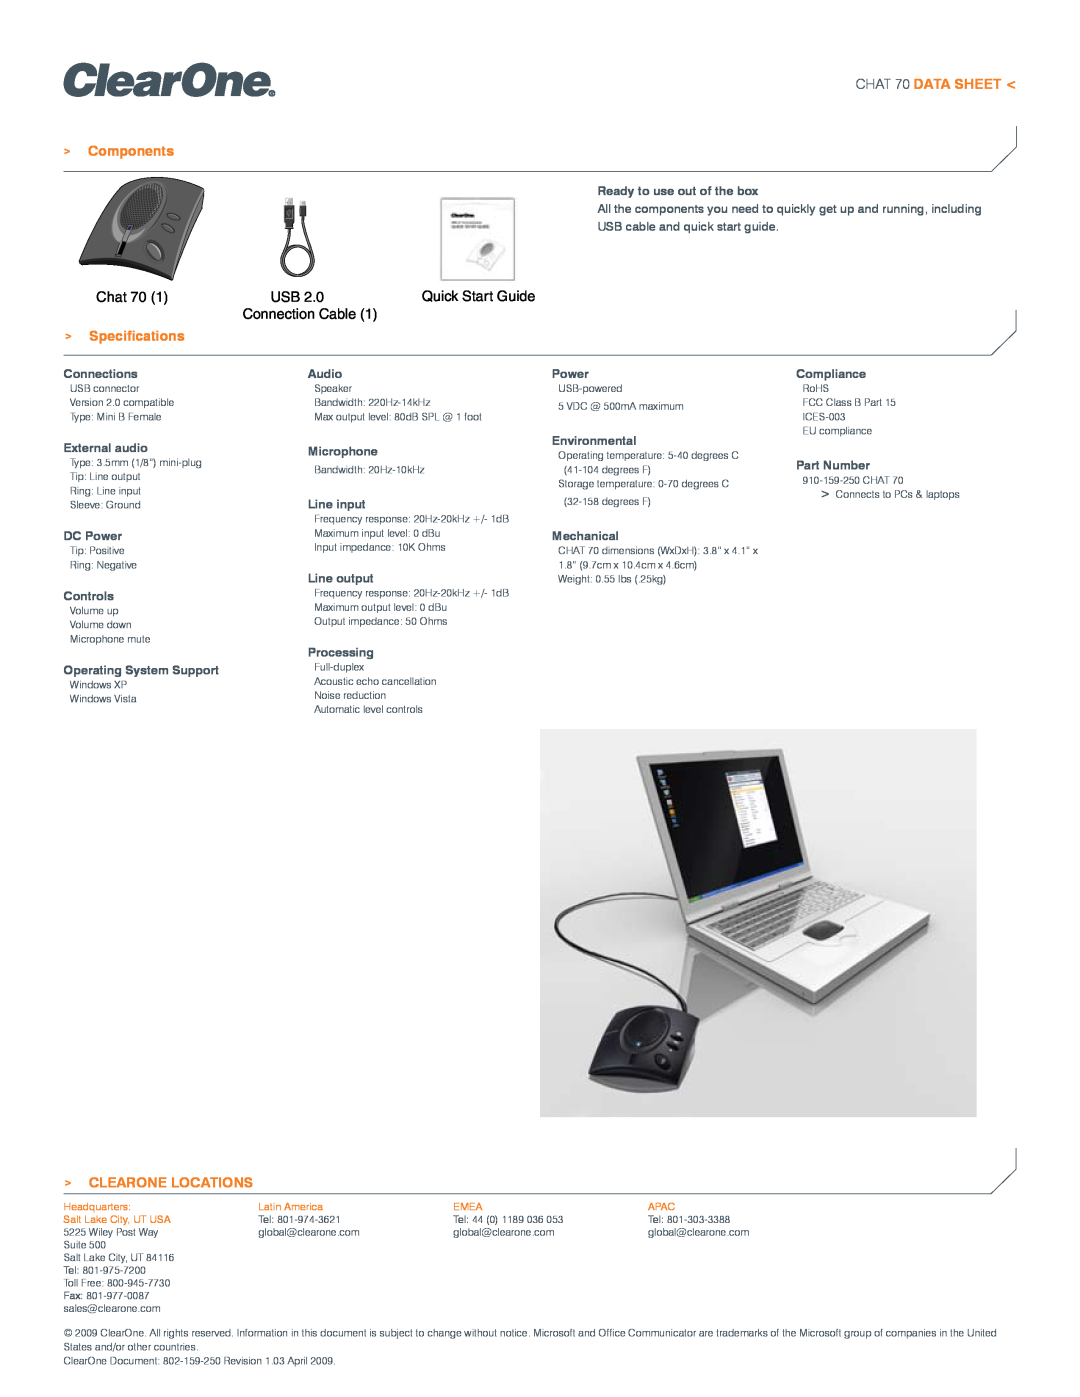 ClearOne comm manual CHAT 70 Data Sheet Components, Specifications, Clearone Locations, Chat 70, Quick Start Guide 